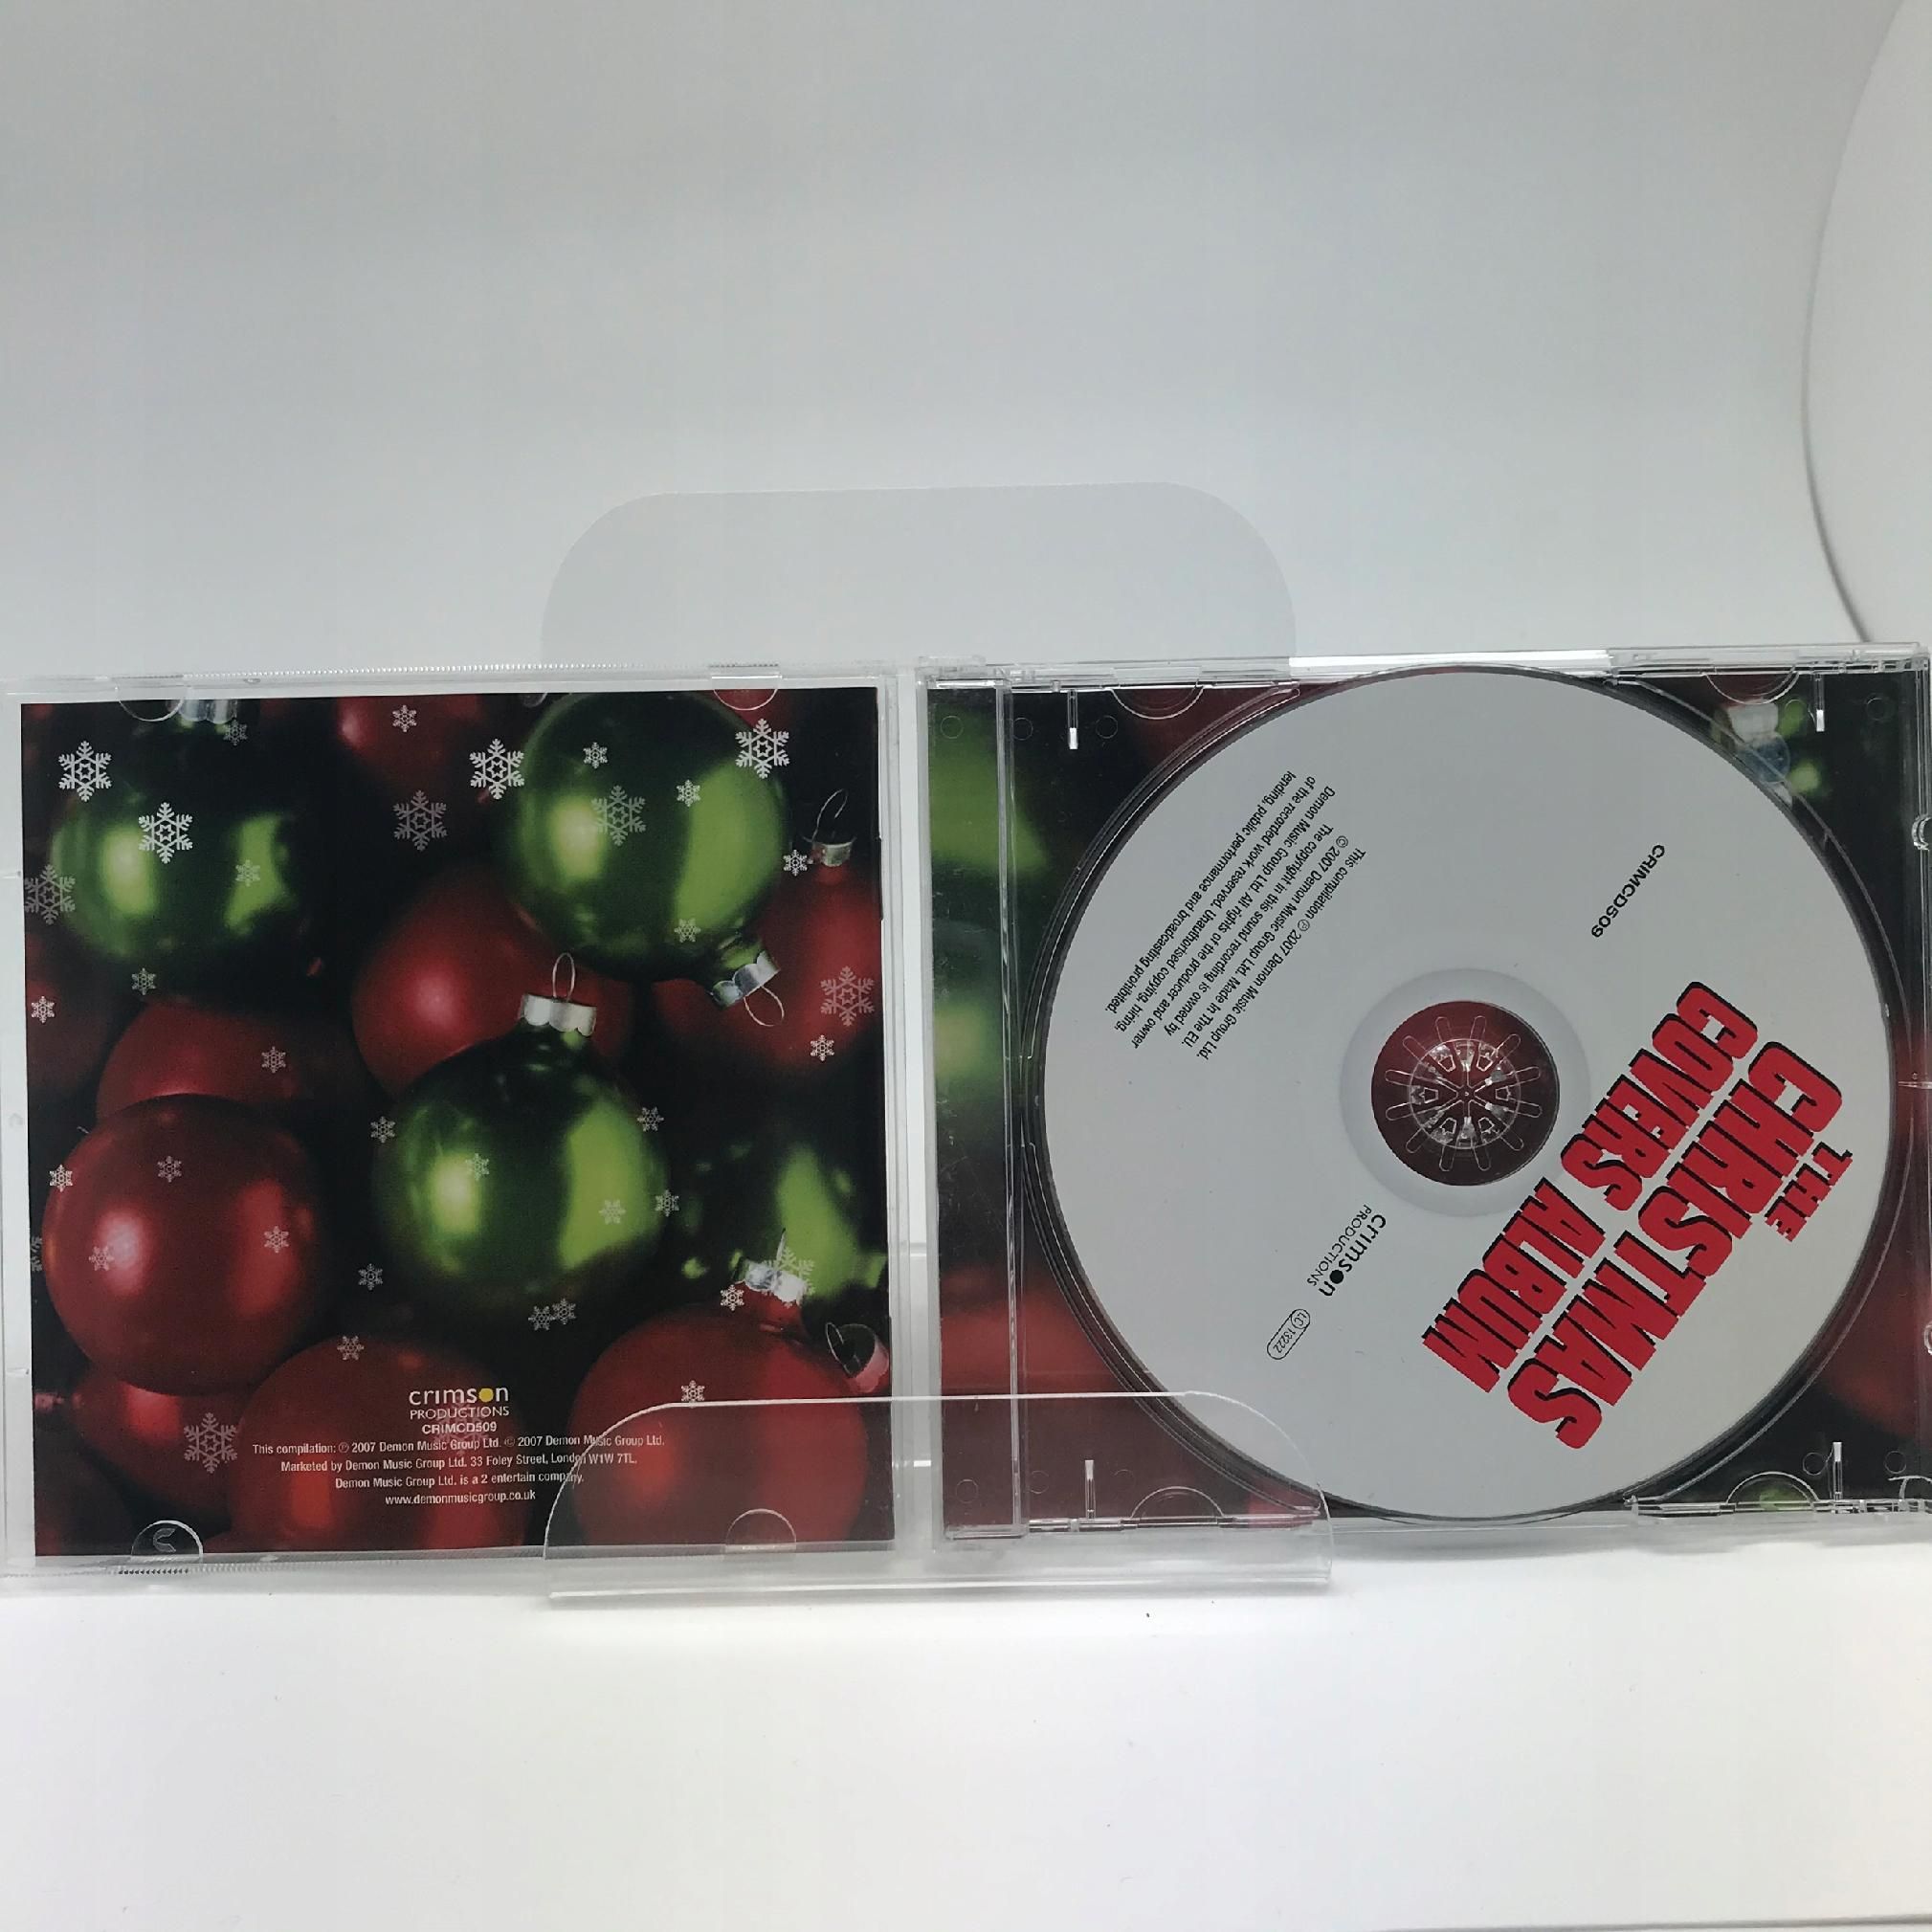 Cd - Various - The Christmas Covers Album